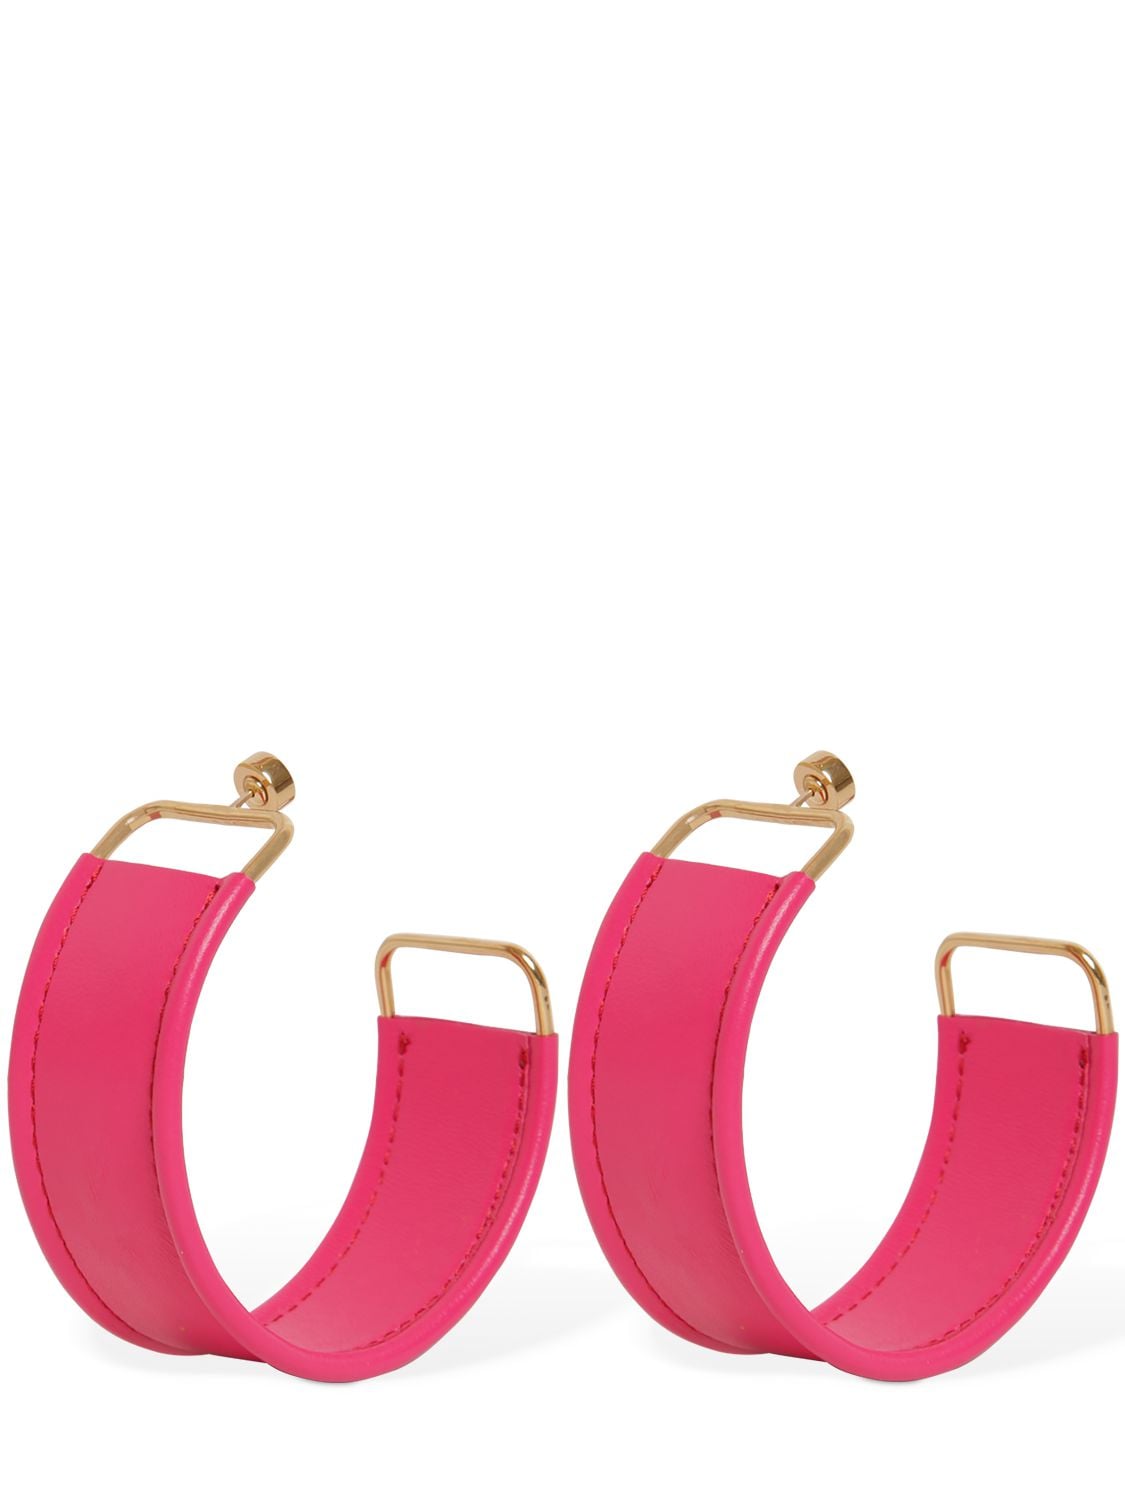 JACQUEMUS LES FAUTEUILS BIG HOOP LEATHER EARRINGS,70IG1T005-UELOSW2